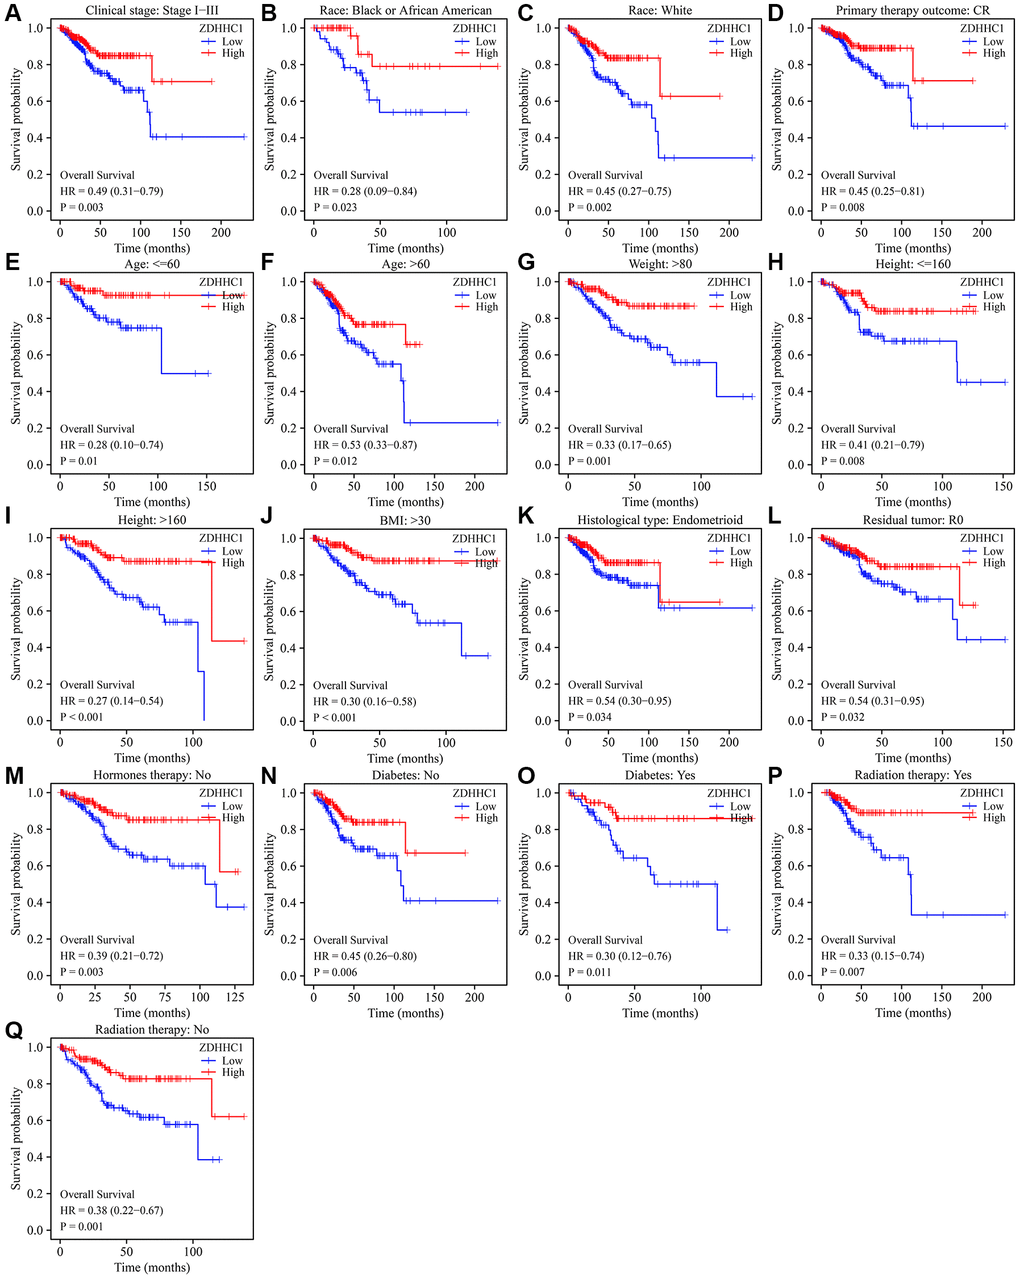 ZDHHC1 expression is associated with poor survival in subgroups of patients with UCEC. (A) Tumor stage I–III. (B) Black or African American. (C) White. (D) CR. (E) Age ≤60. (F) Age >60. (G) Weight >80 kg. (H) Height ≤160 cm. (I) Height >160 cm. (J) BMI >30. (K) Histological type of endometrioid. (L) R0. (M) Without hormone therapy. (N–O) With/without diabetes. (P, Q) With/without radiation therapy. Abbreviations: UCEC: uterine corpus endometrial carcinoma; ZDHHC1: zinc finger DHHC-type containing 1; CR: complete response; BMI: body mass index.